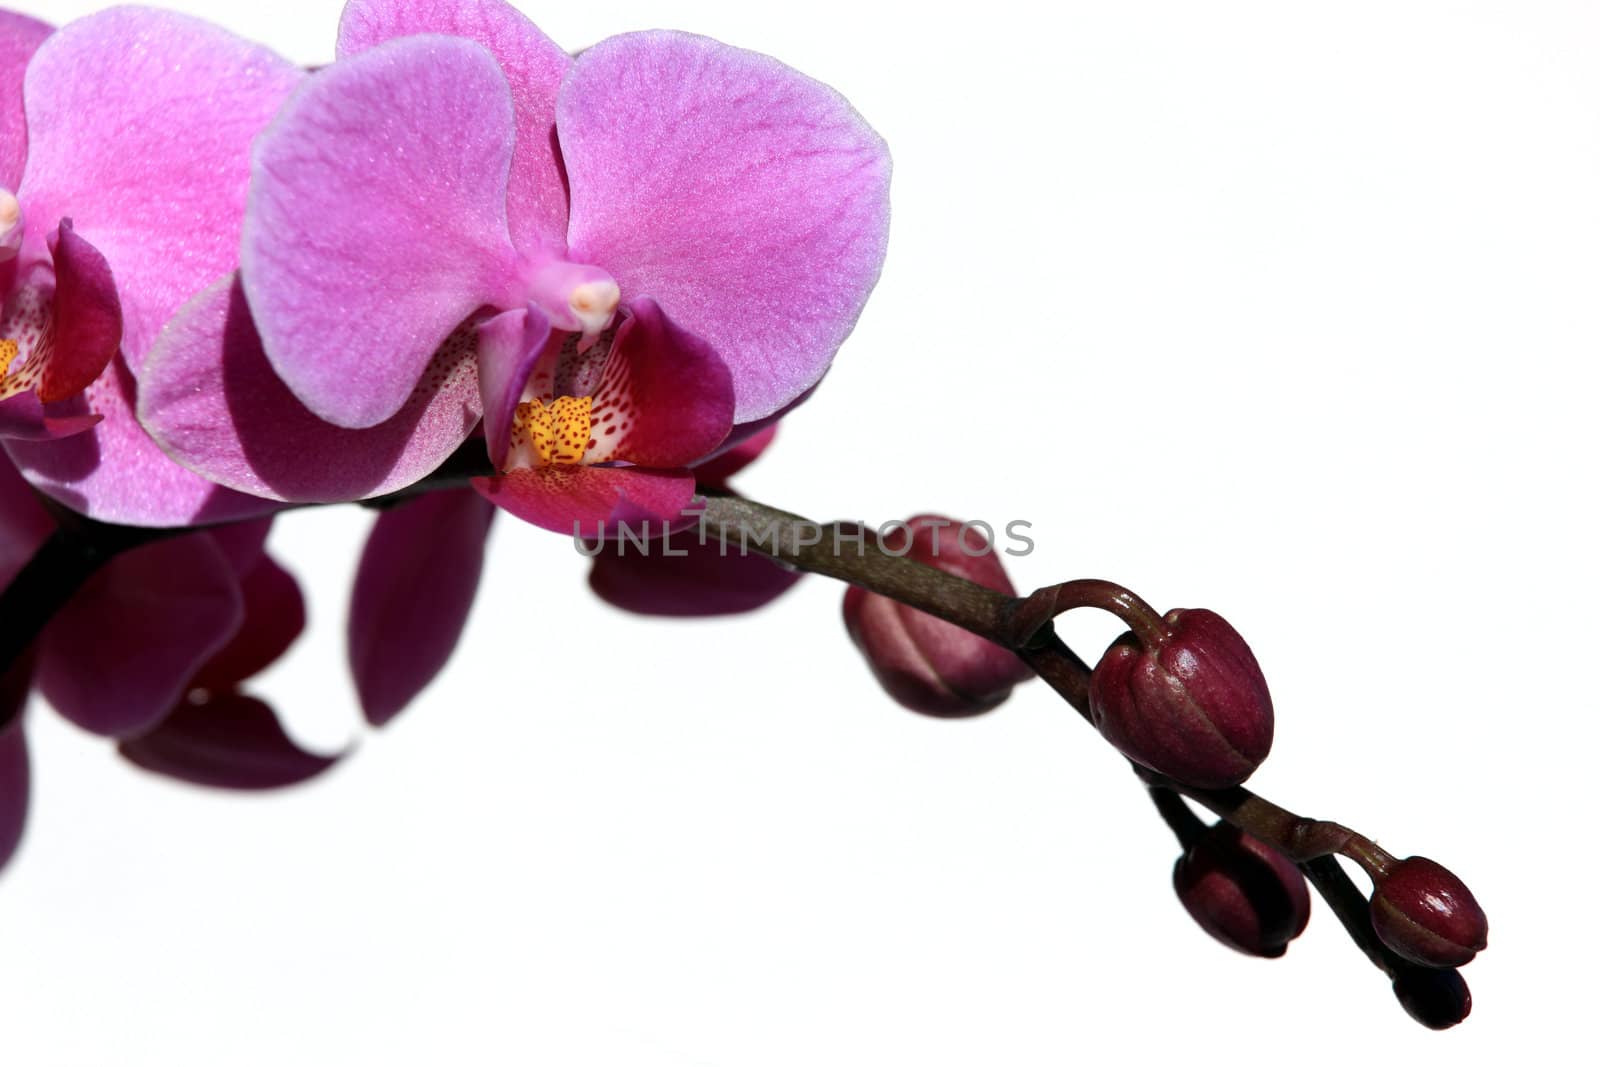 Violet phalaenopsis orchid with buds isolated on a white background